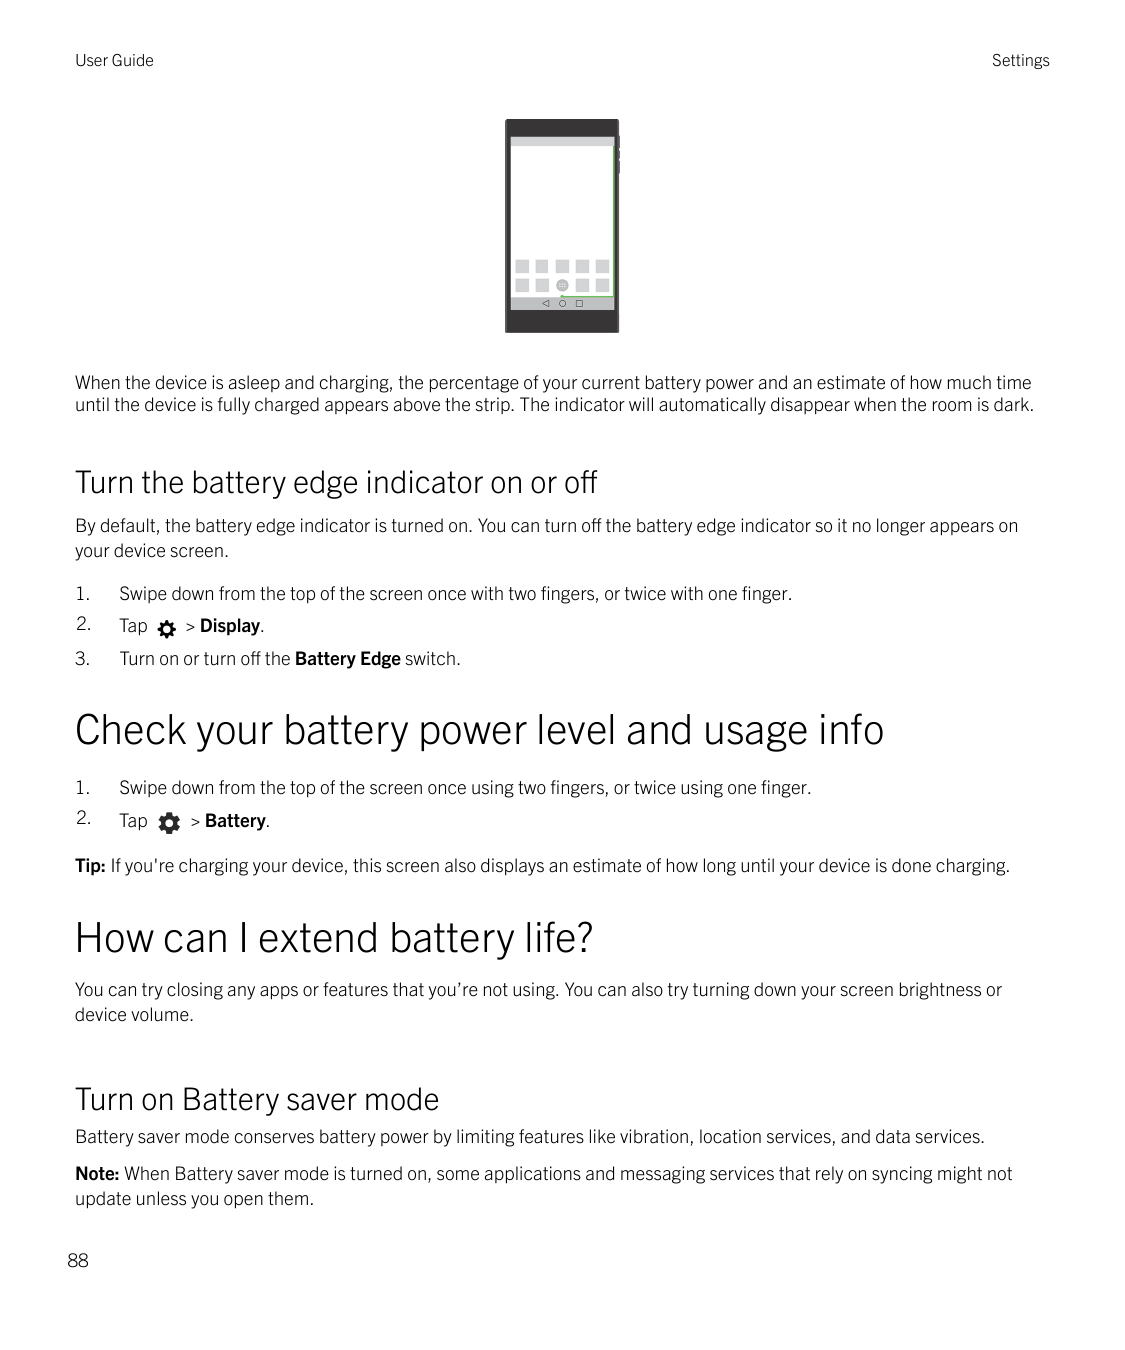 User GuideSettingsWhen the device is asleep and charging, the percentage of your current battery power and an estimate of how mu